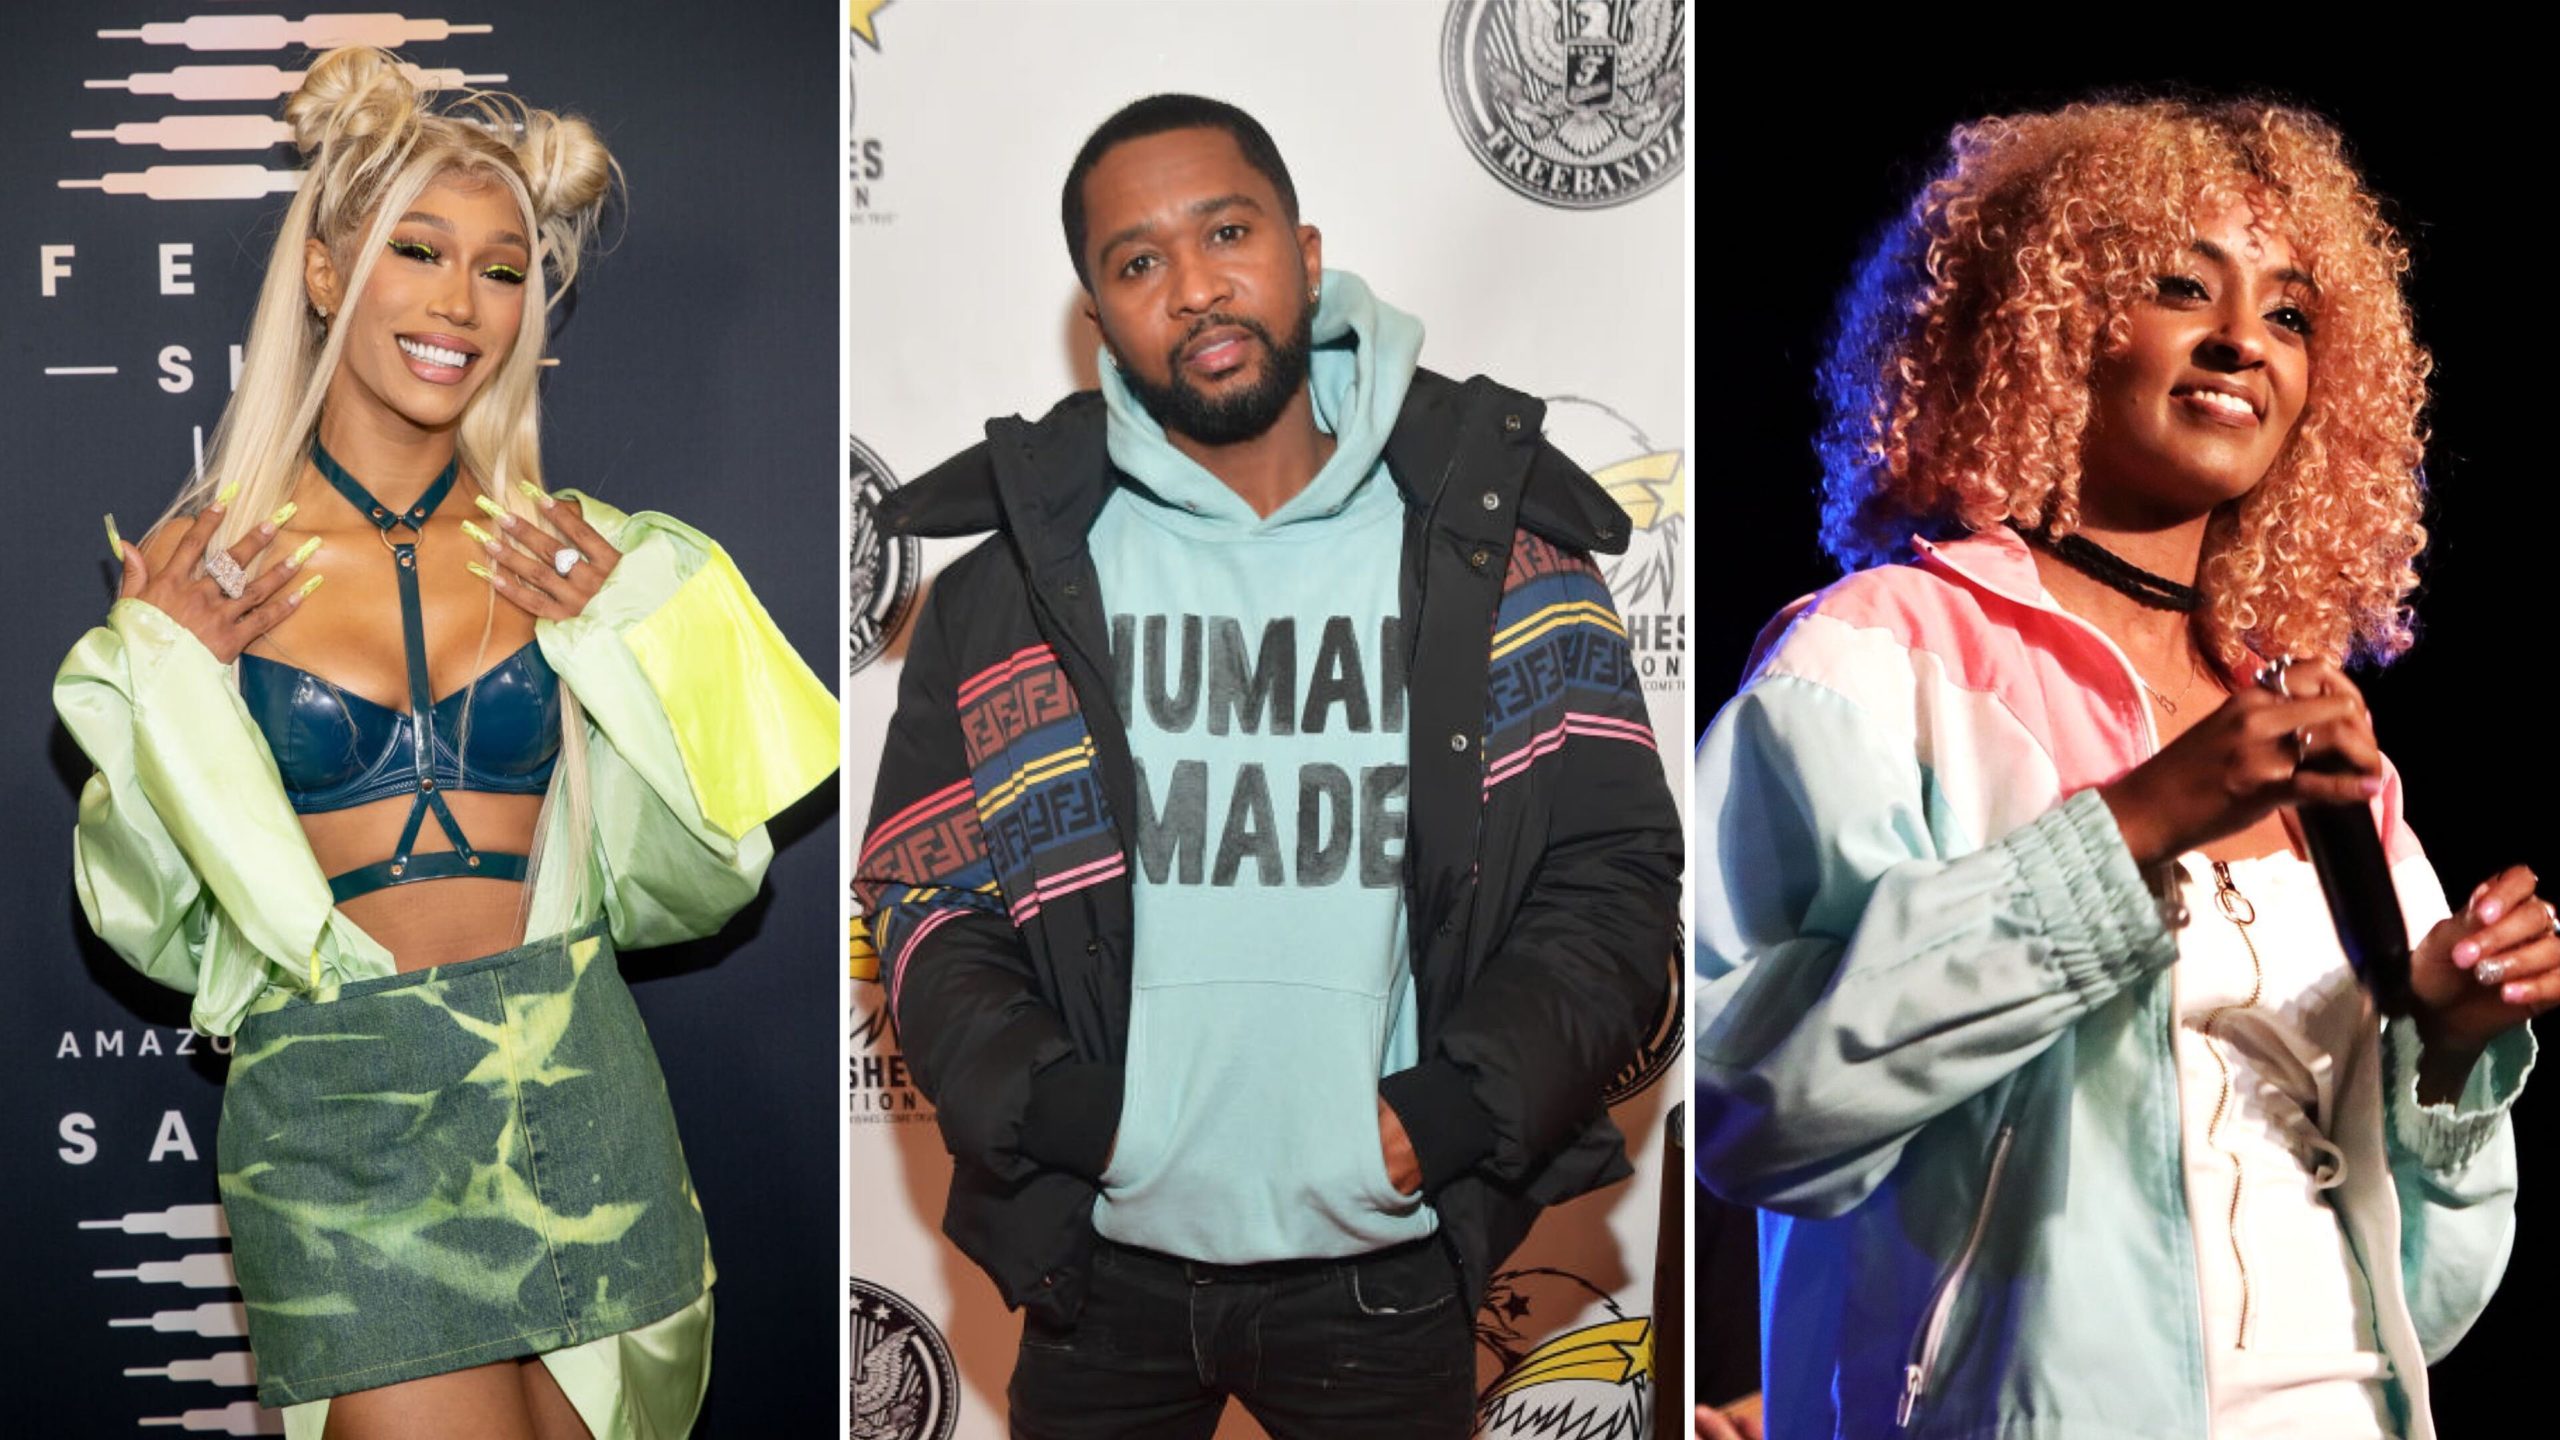 Bia, Zaytoven And More Music Heavyweights Set To Headline AfroTech Conference In Austin, TX